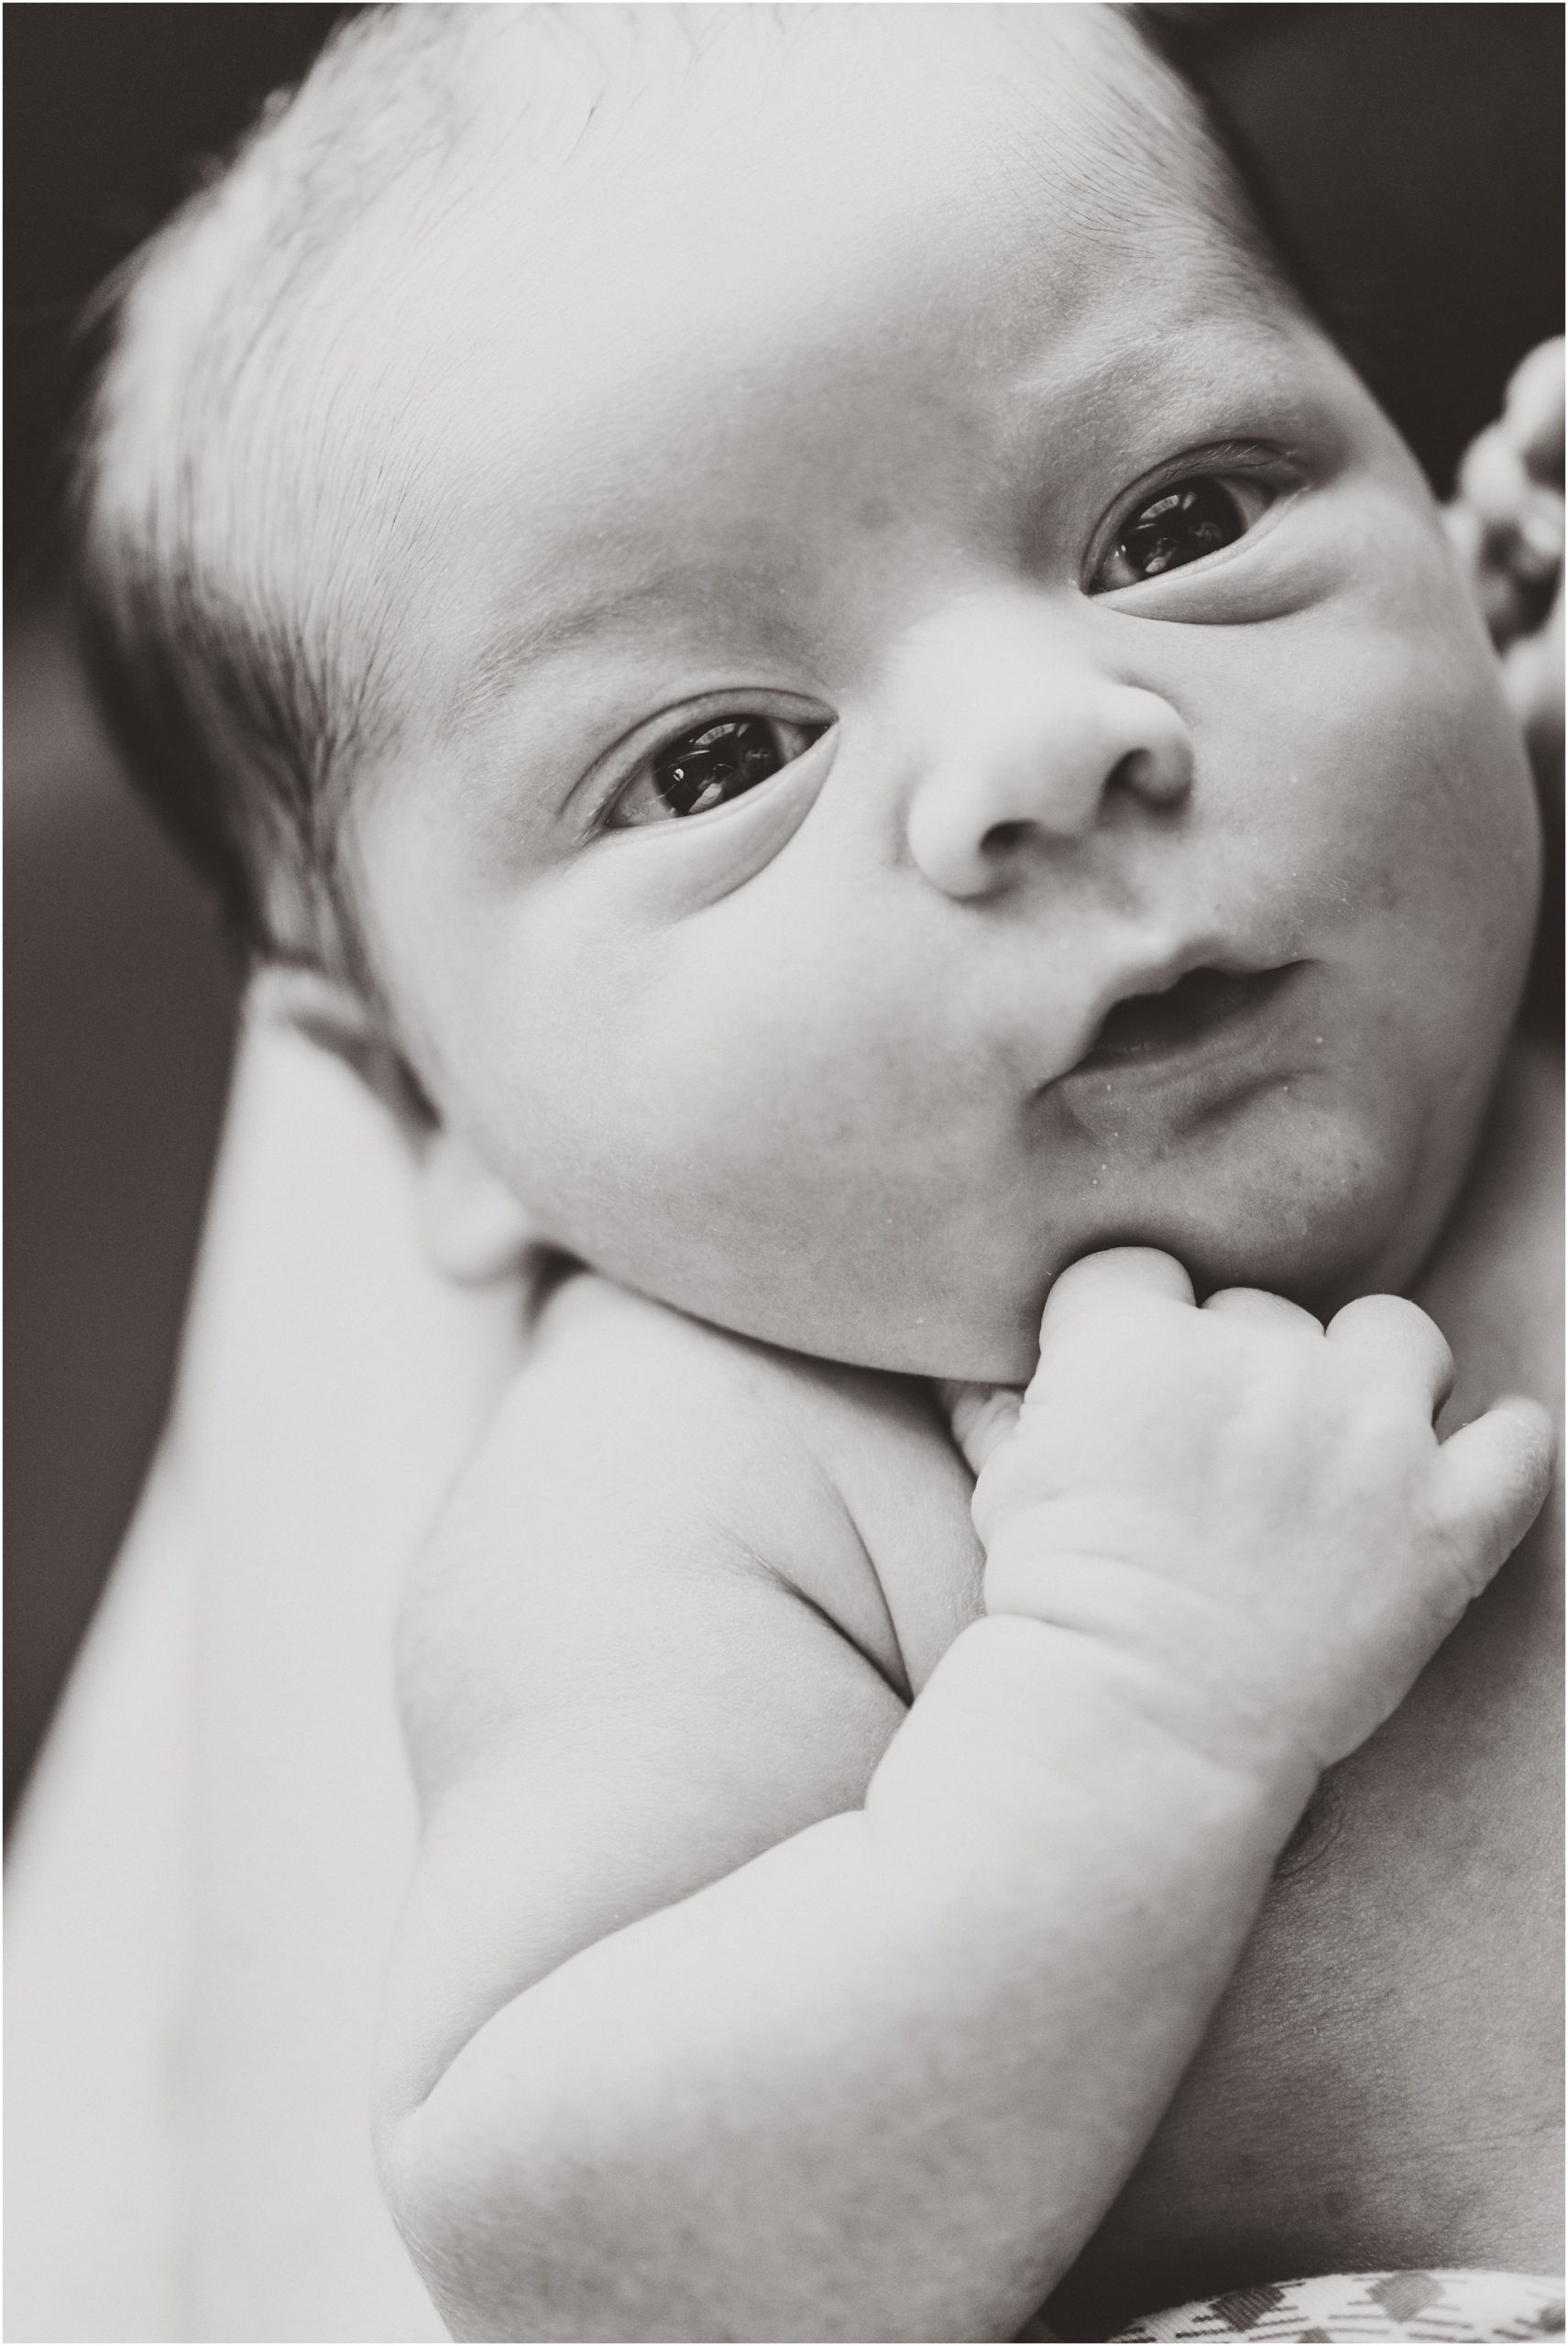 black and white image of newborn baby face up close for newborn session